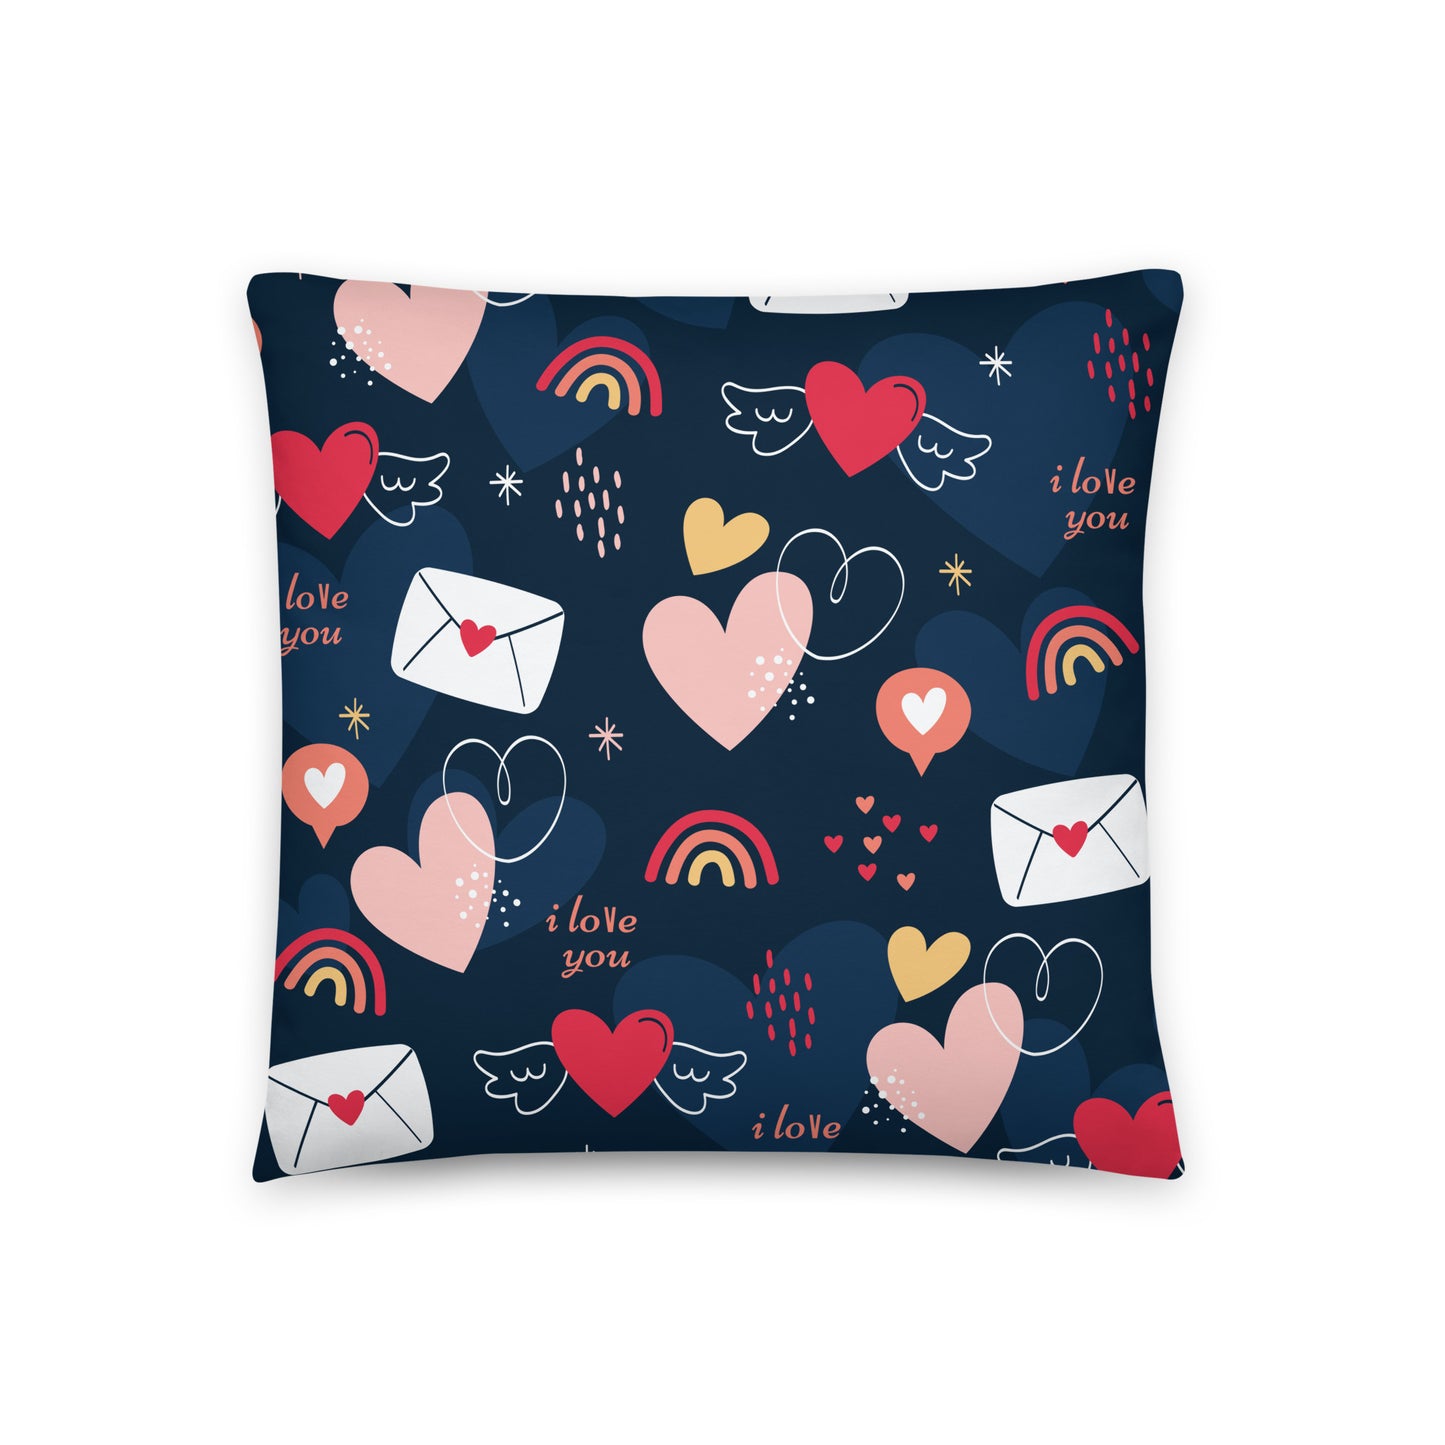 Love Letter - Sustainably Made Pillows